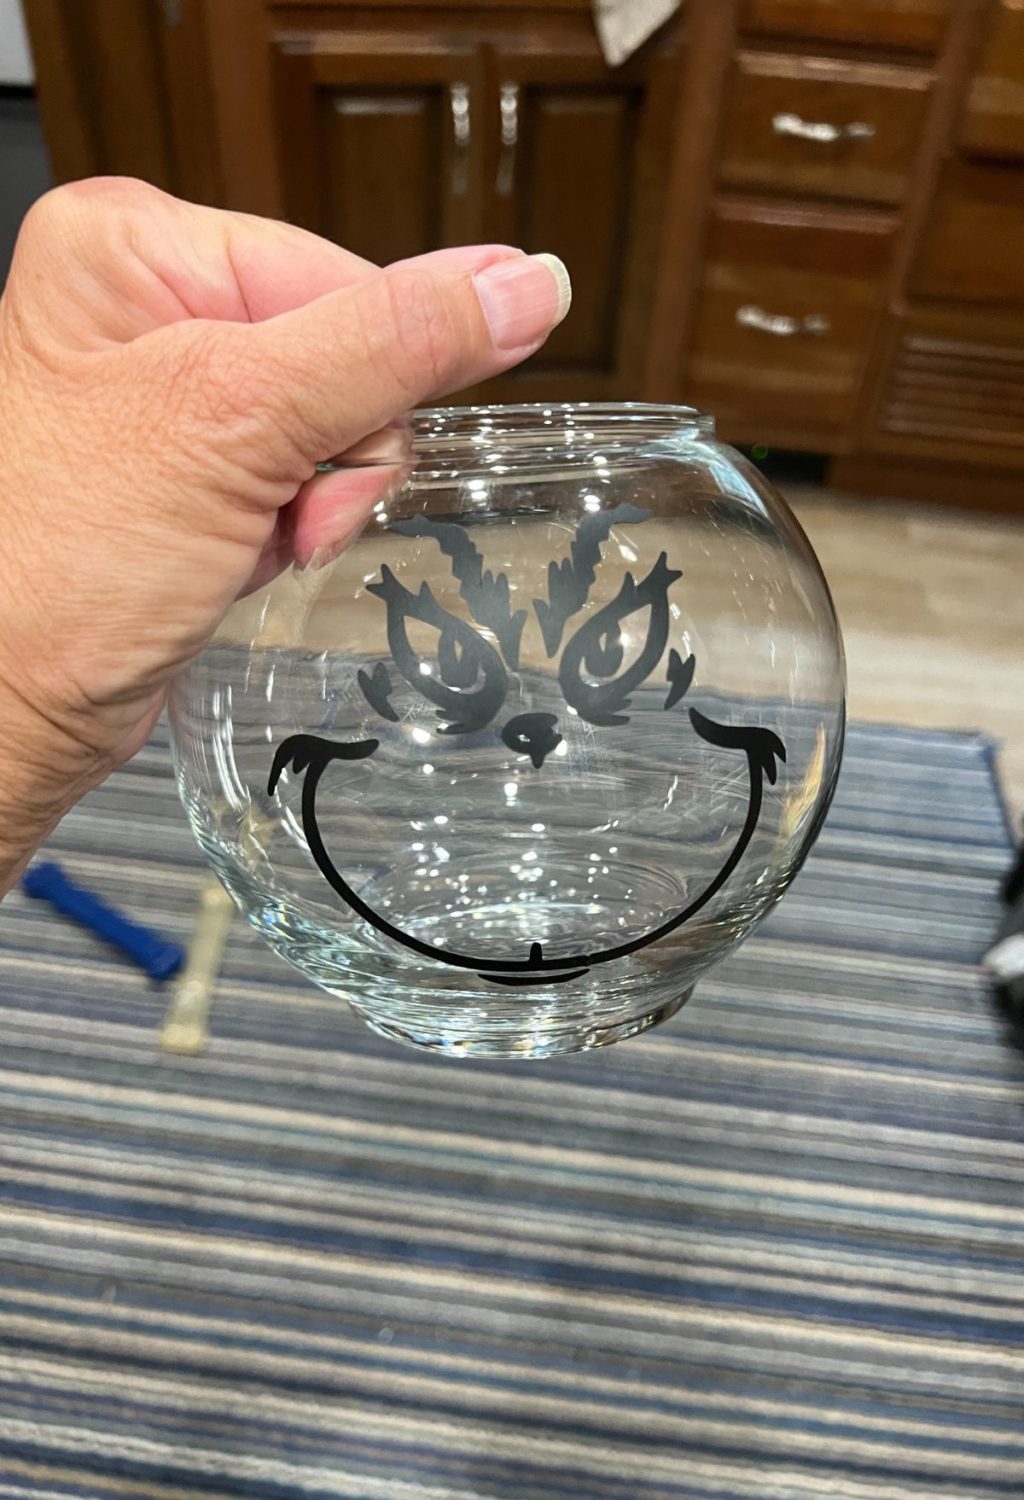 A person holding a glass bowl with a face on it.